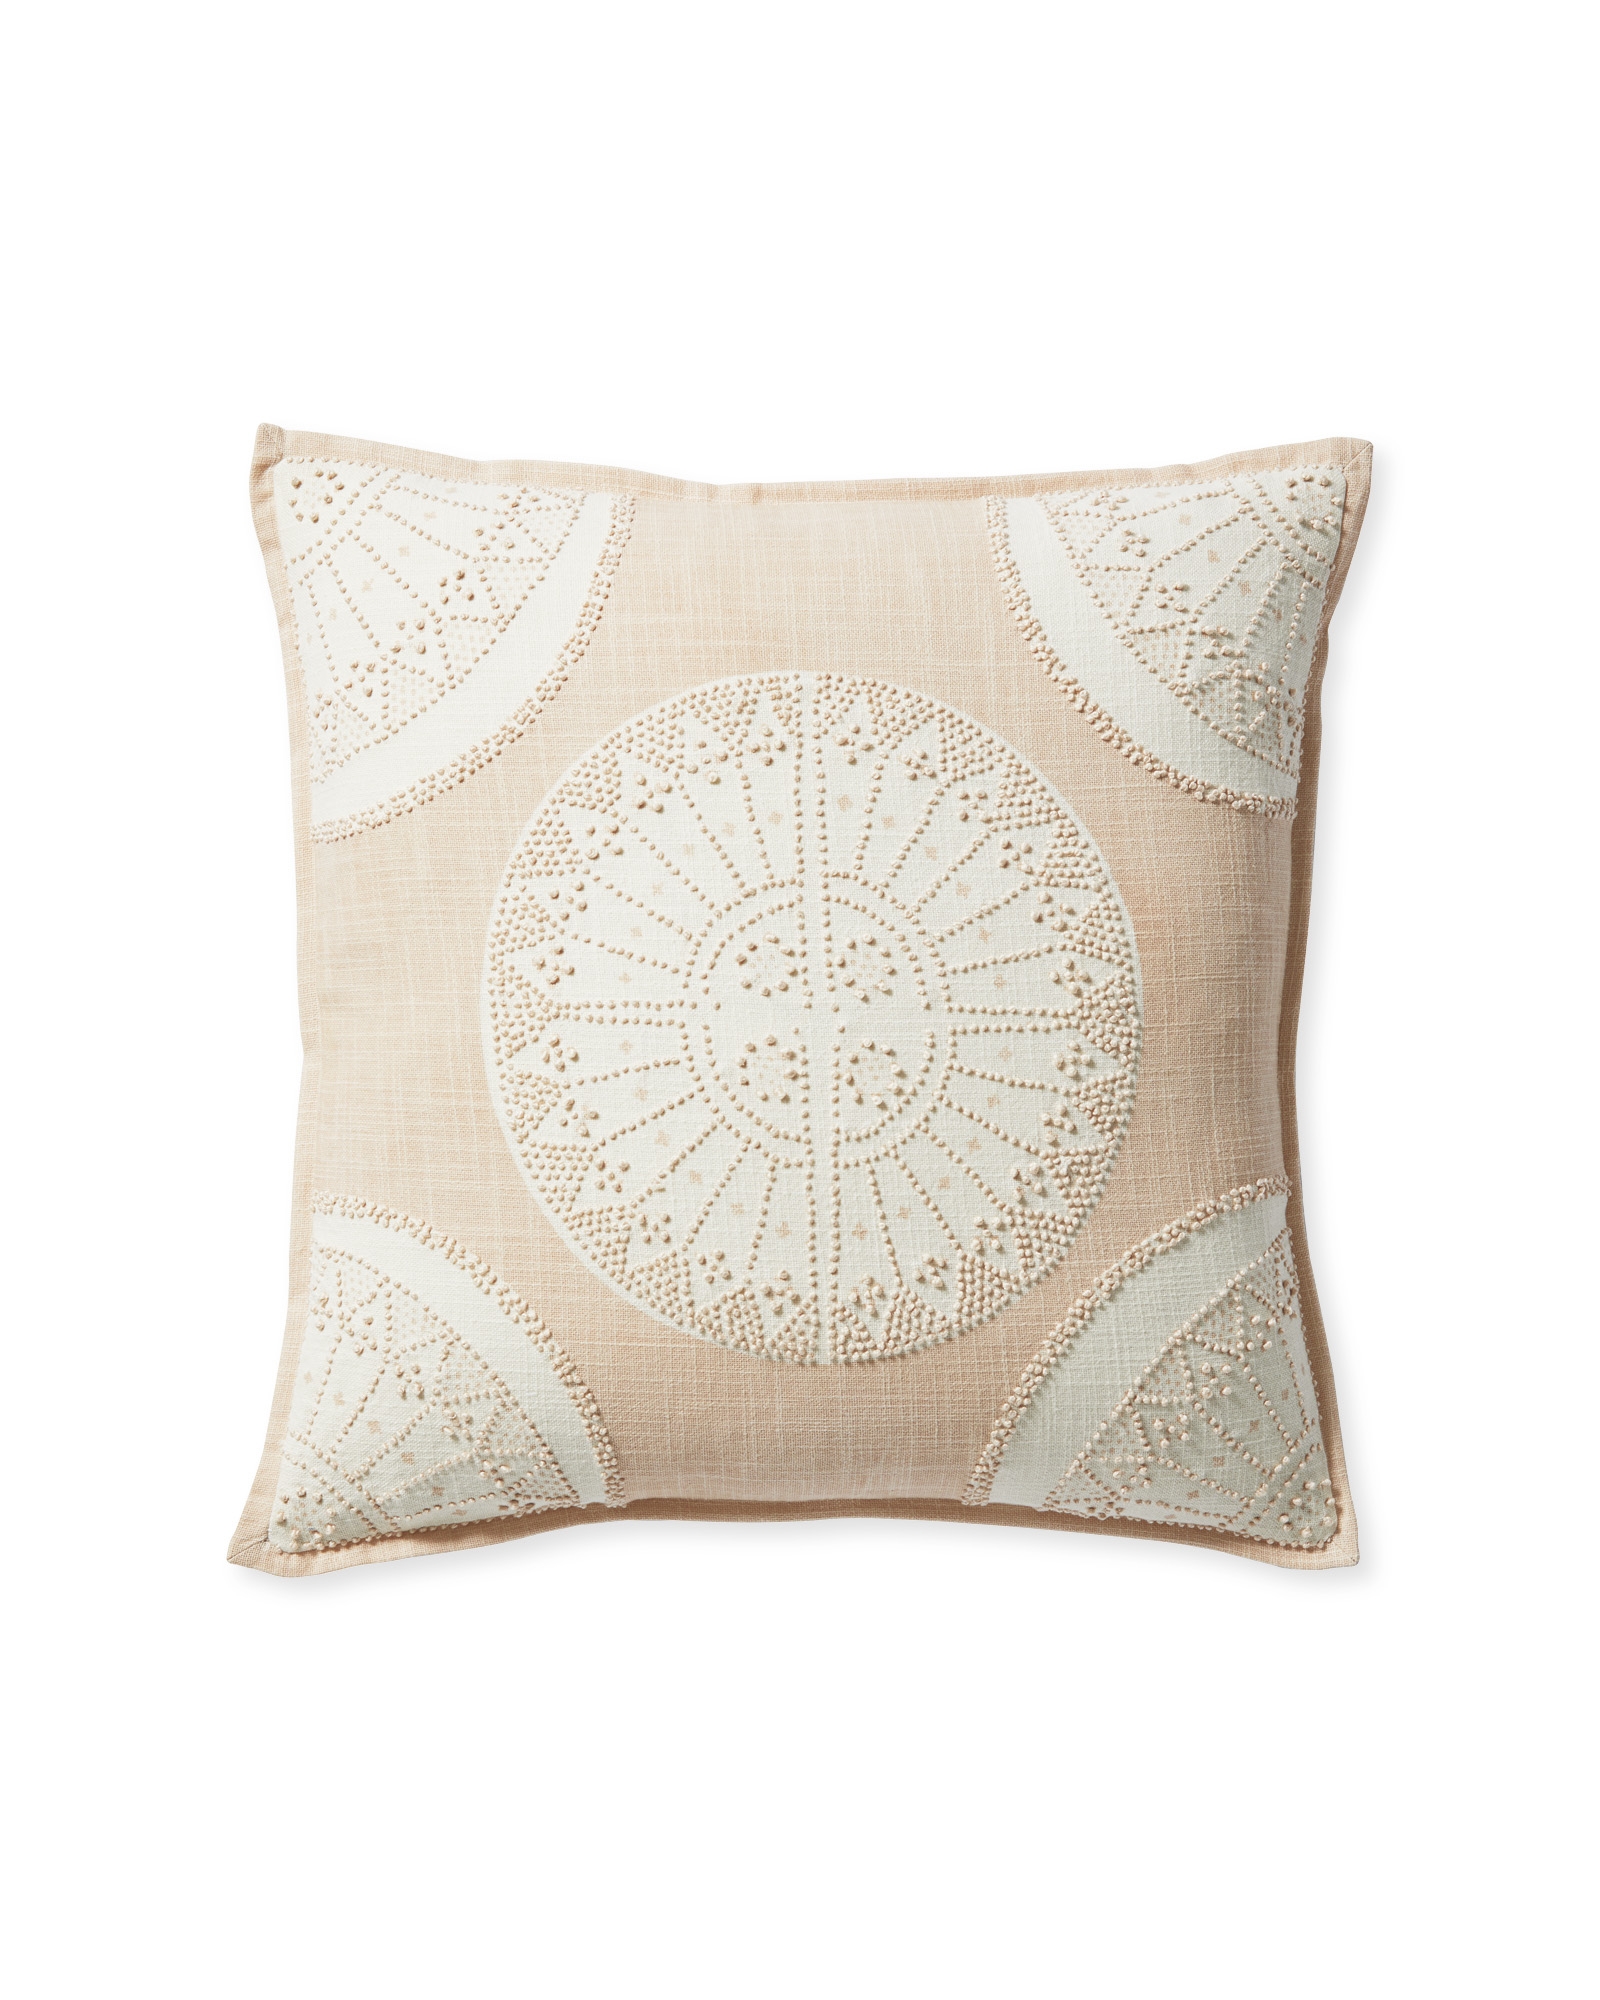 Lucia Pillow Cover - Pink Sane - Image 0